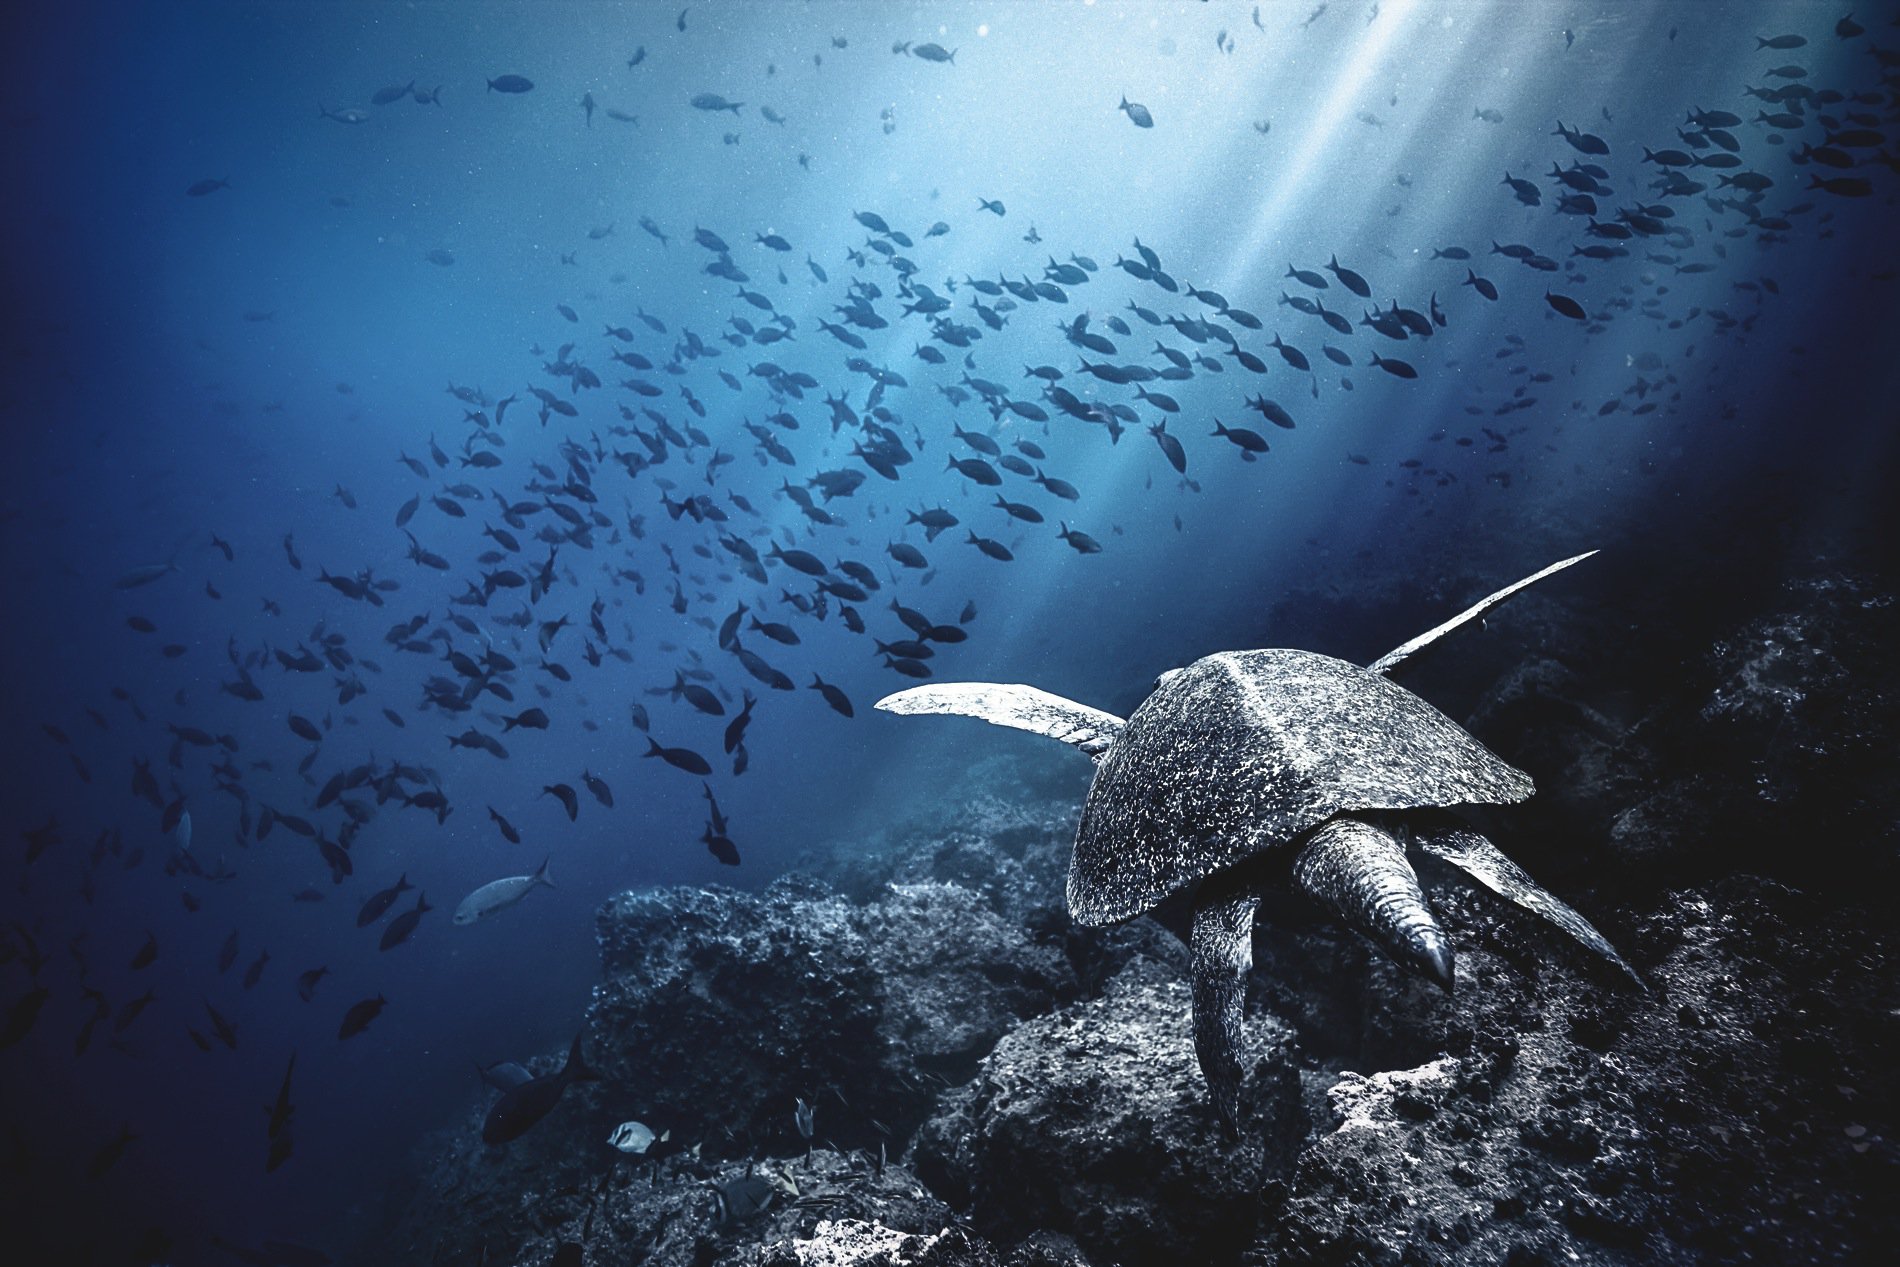 Underwater in the Galapagos. Photo courtesy, IWC.